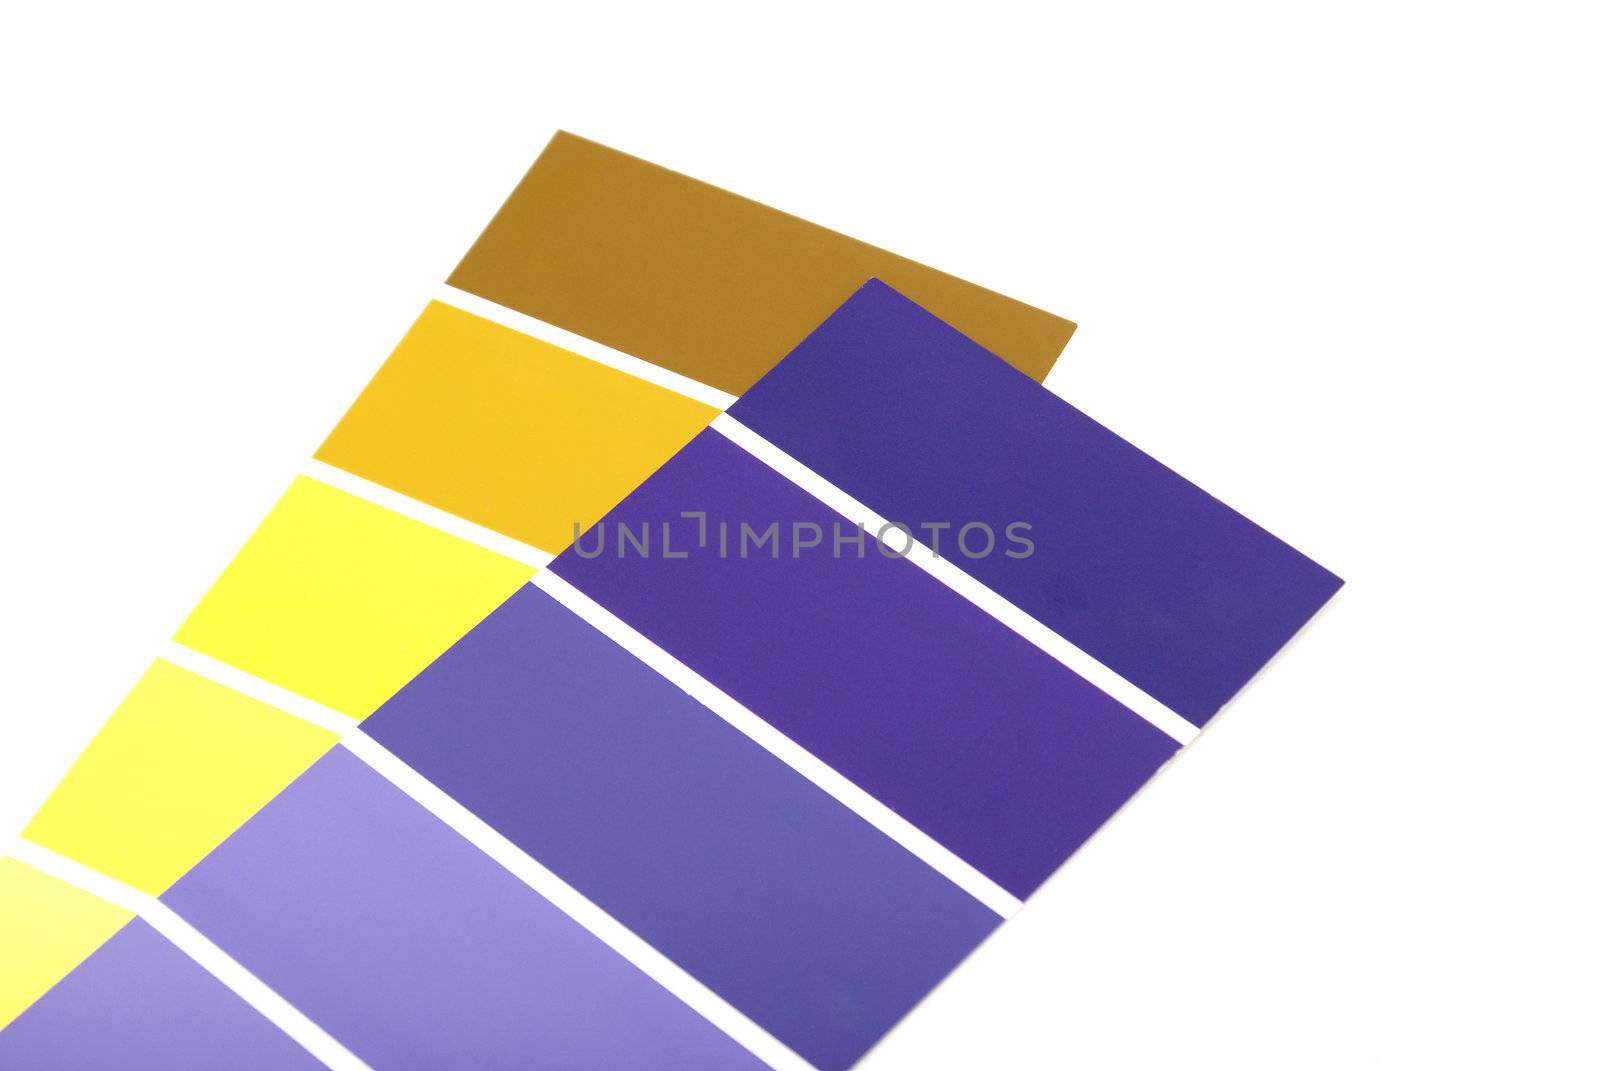 A yellow and purple paint sample on white background.